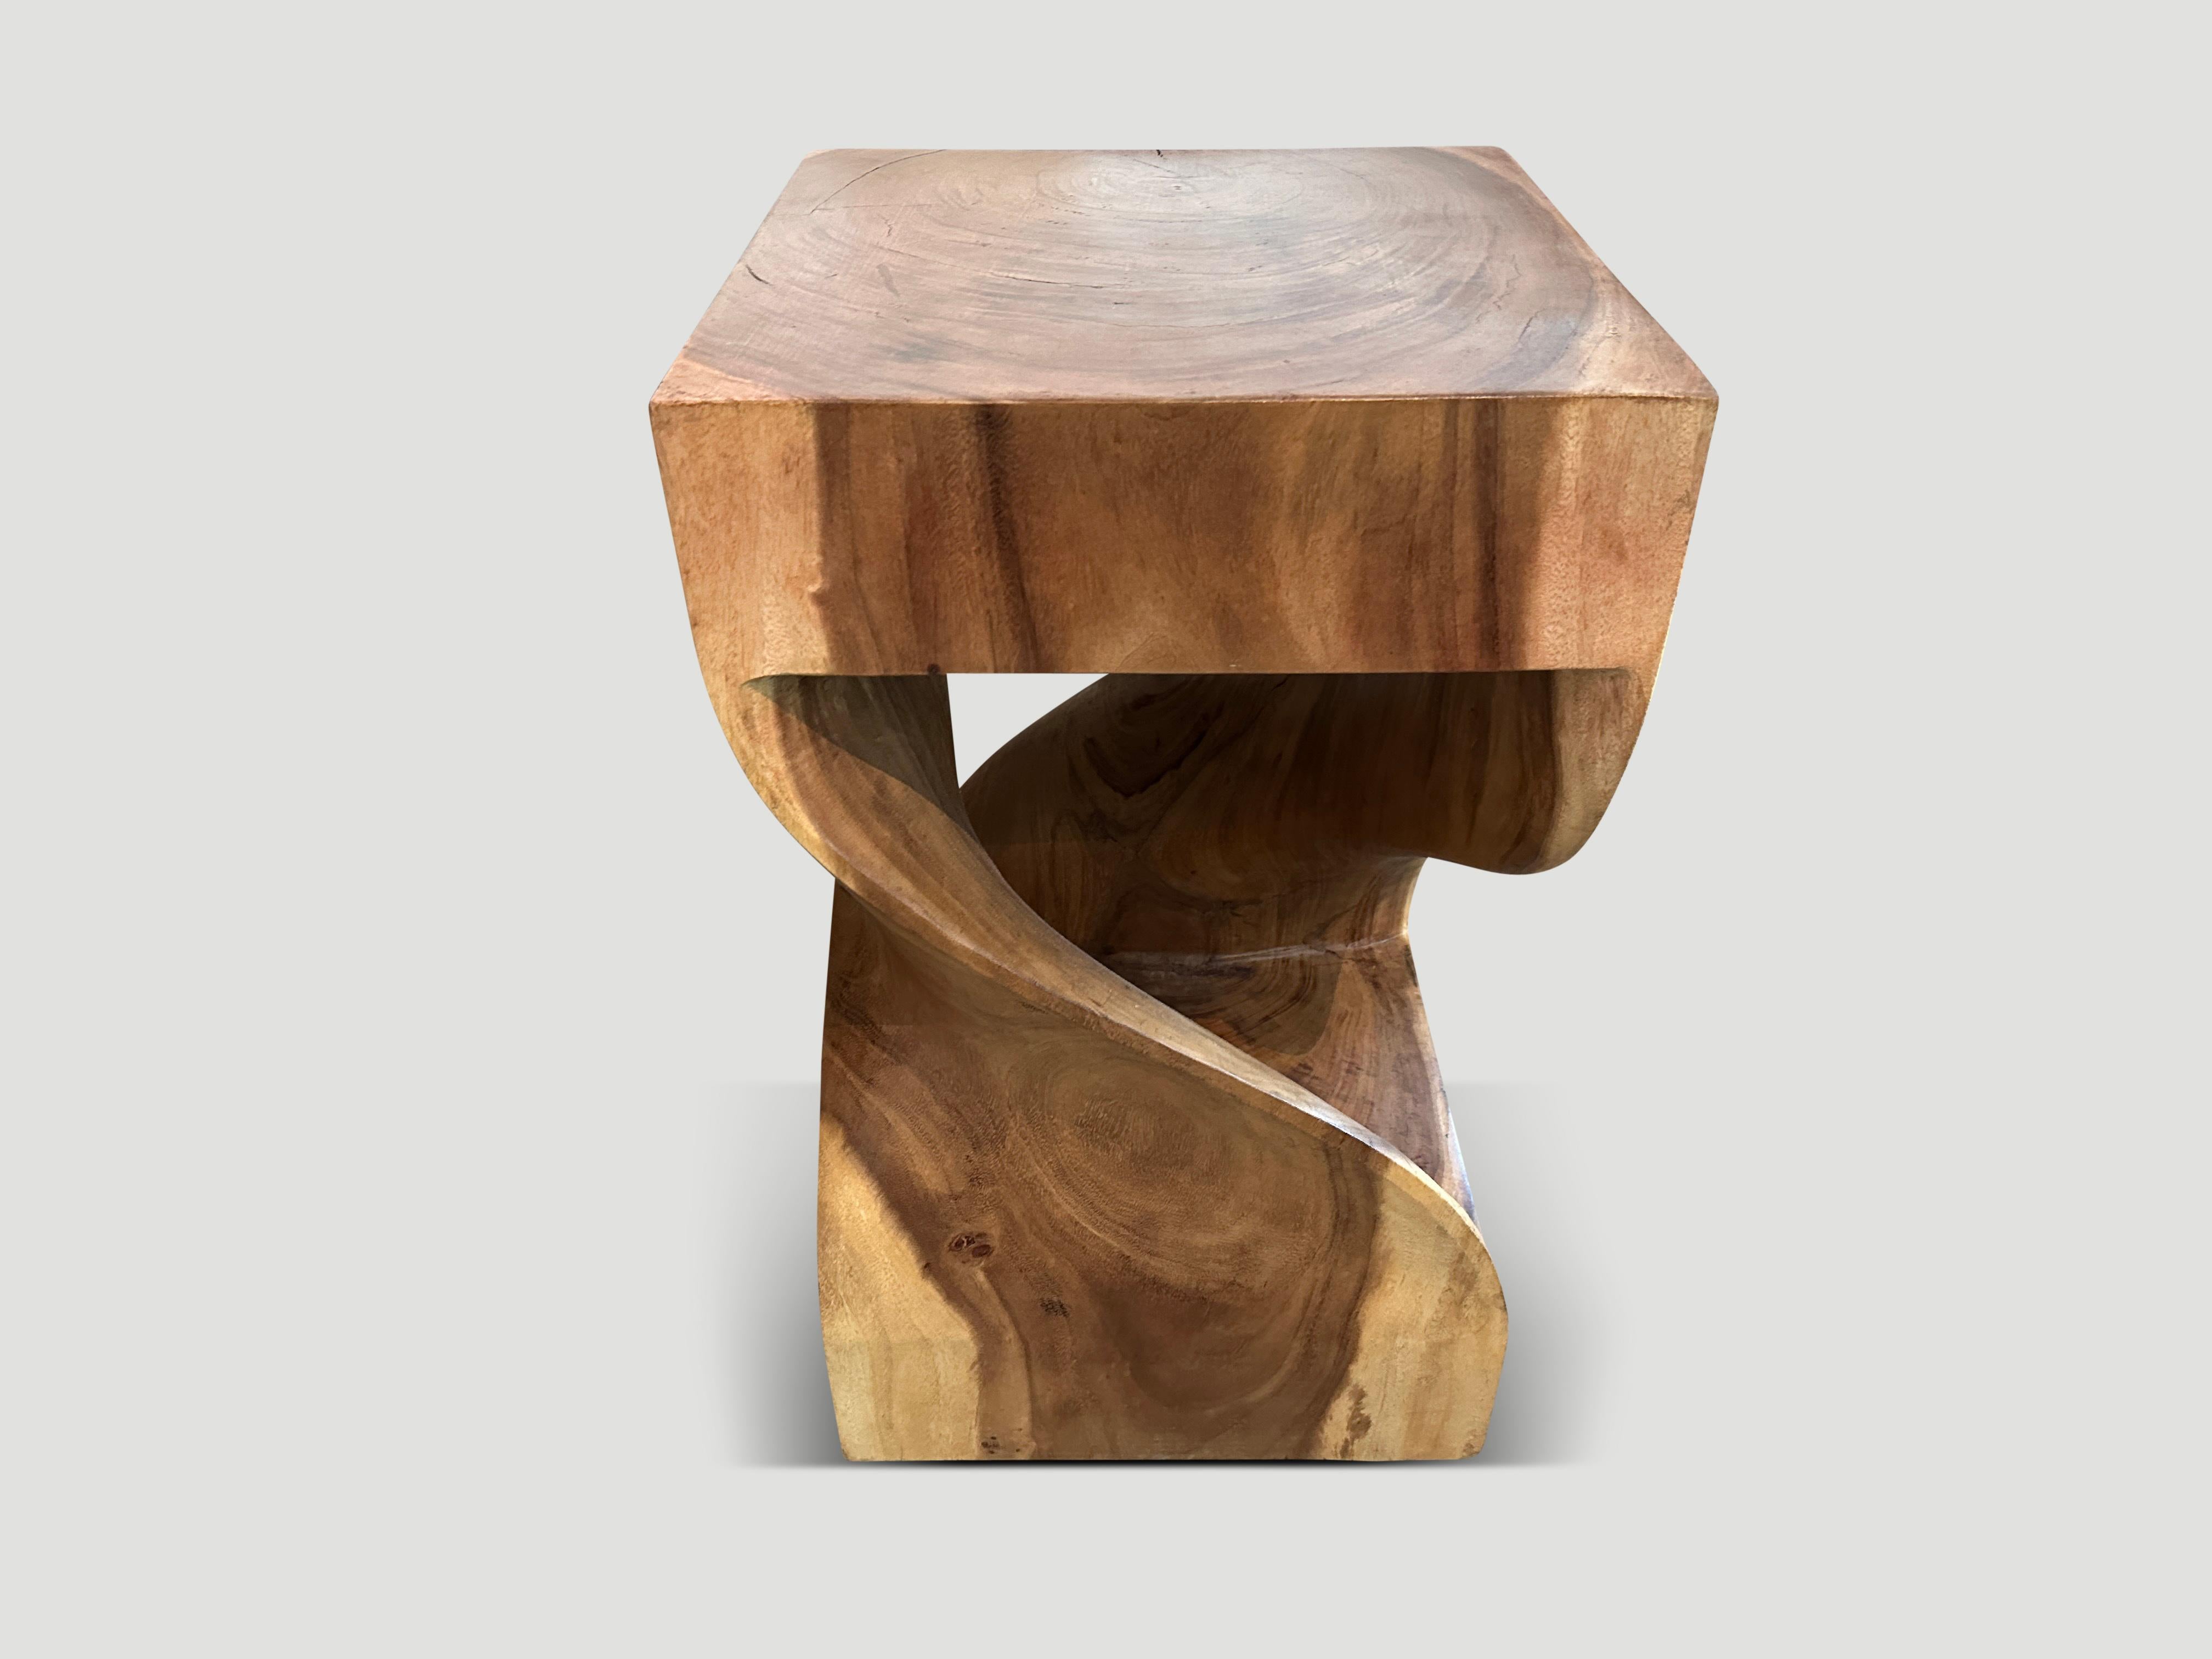 Andrianna Shamaris Sculptural Suar Wood Side Table or Pedestal In Excellent Condition For Sale In New York, NY